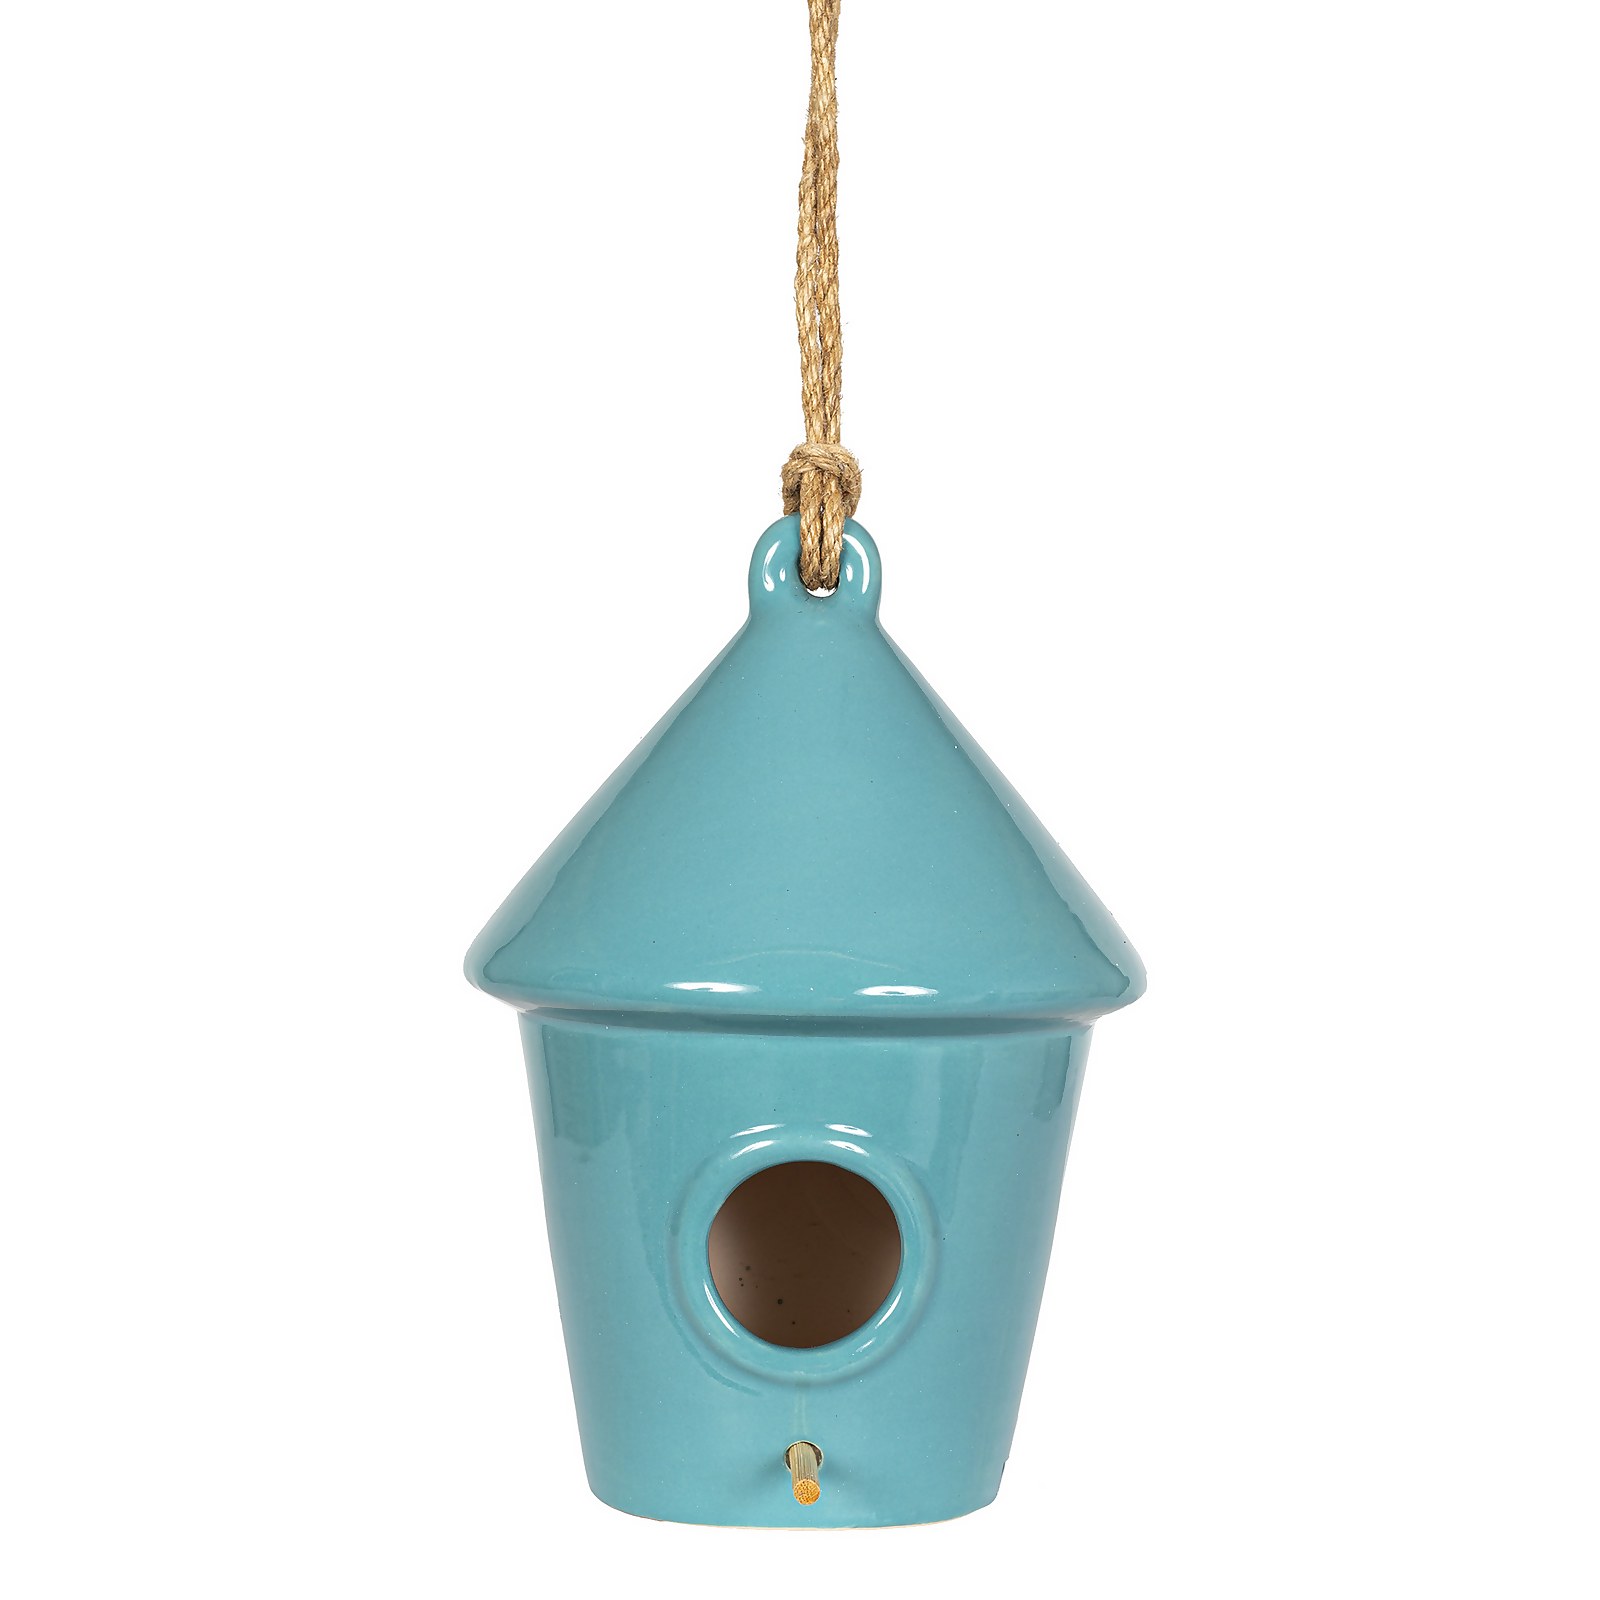 Photo of Conical Ceramic Birdhouse -slate Or Teal- - 26cm